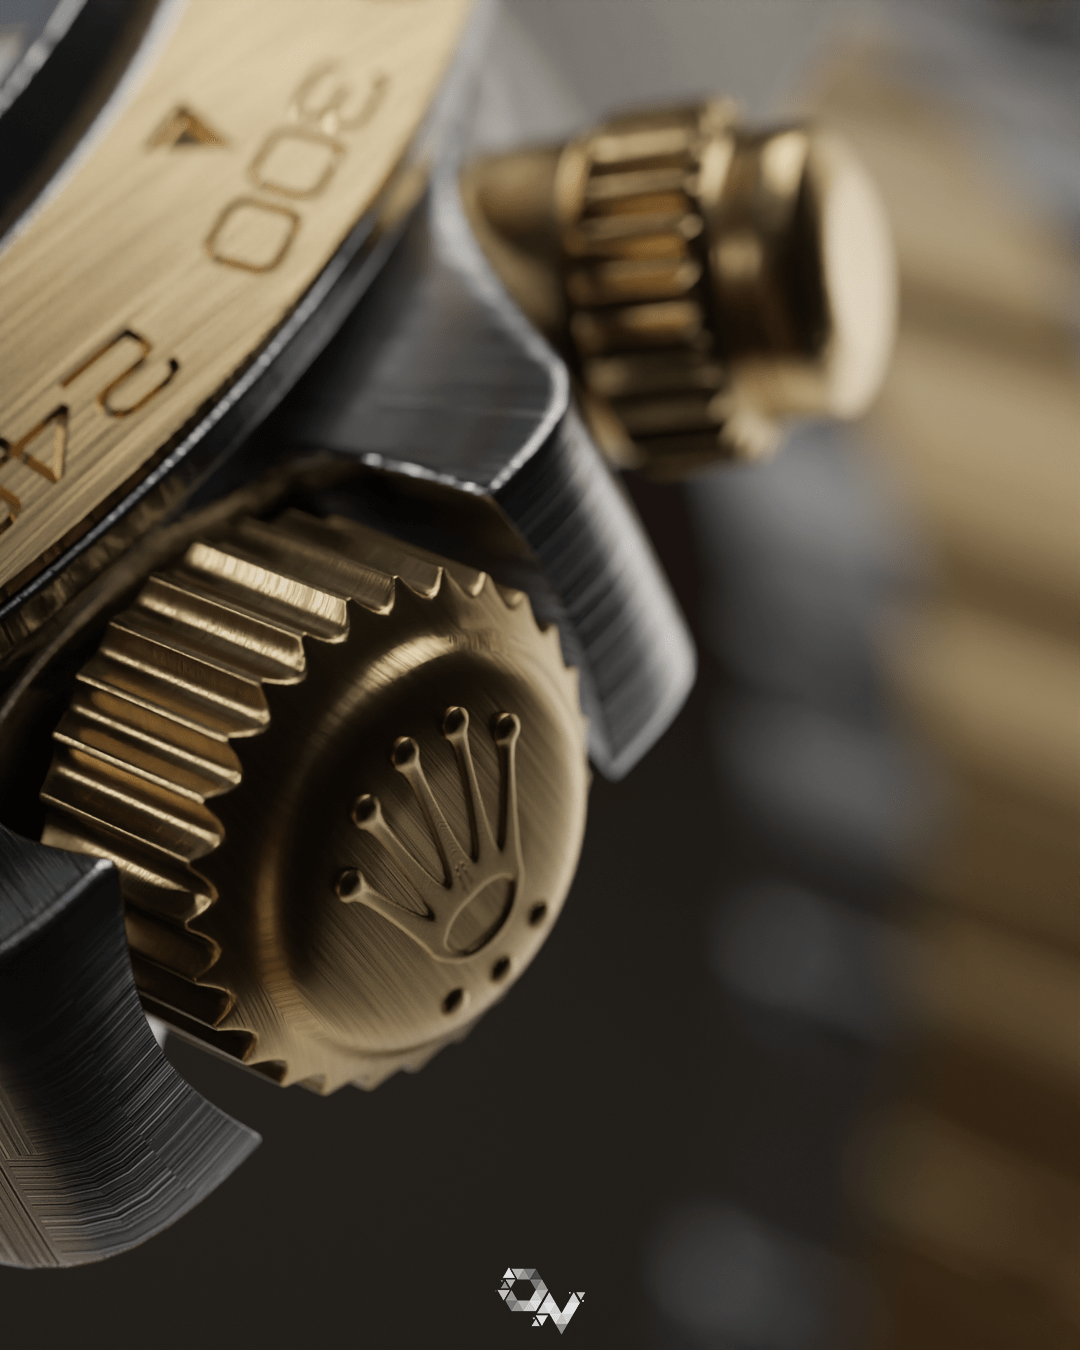 3D blender CGI cycles modern product Render rolex visualization watch